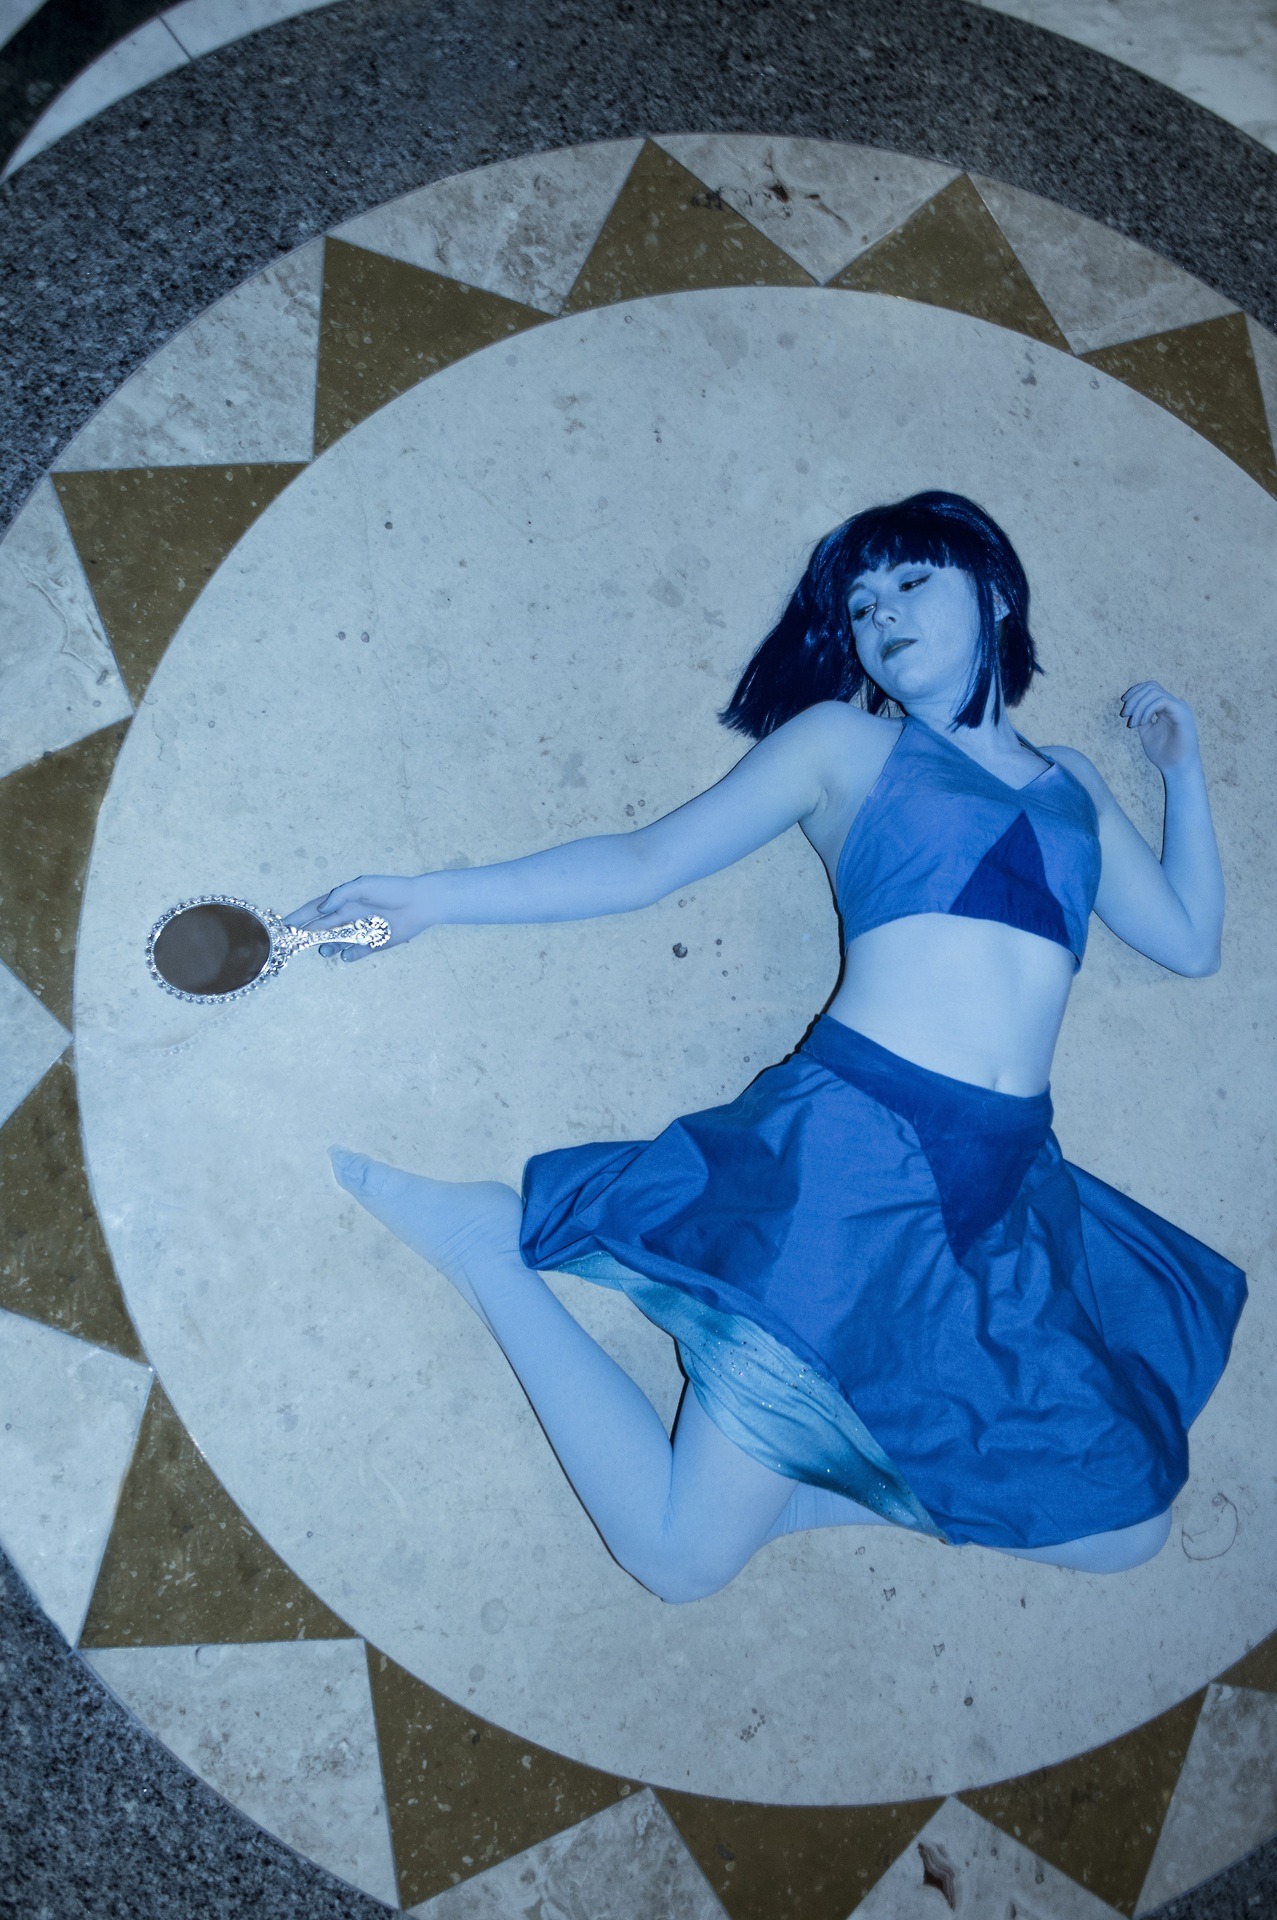 I absolutely loved being Lapis Lazuli at Otakon Vegas. These photos were really fun to take. At one point I had three of my friends around me fixing my wig, costume and posture! I’ll probably post one...